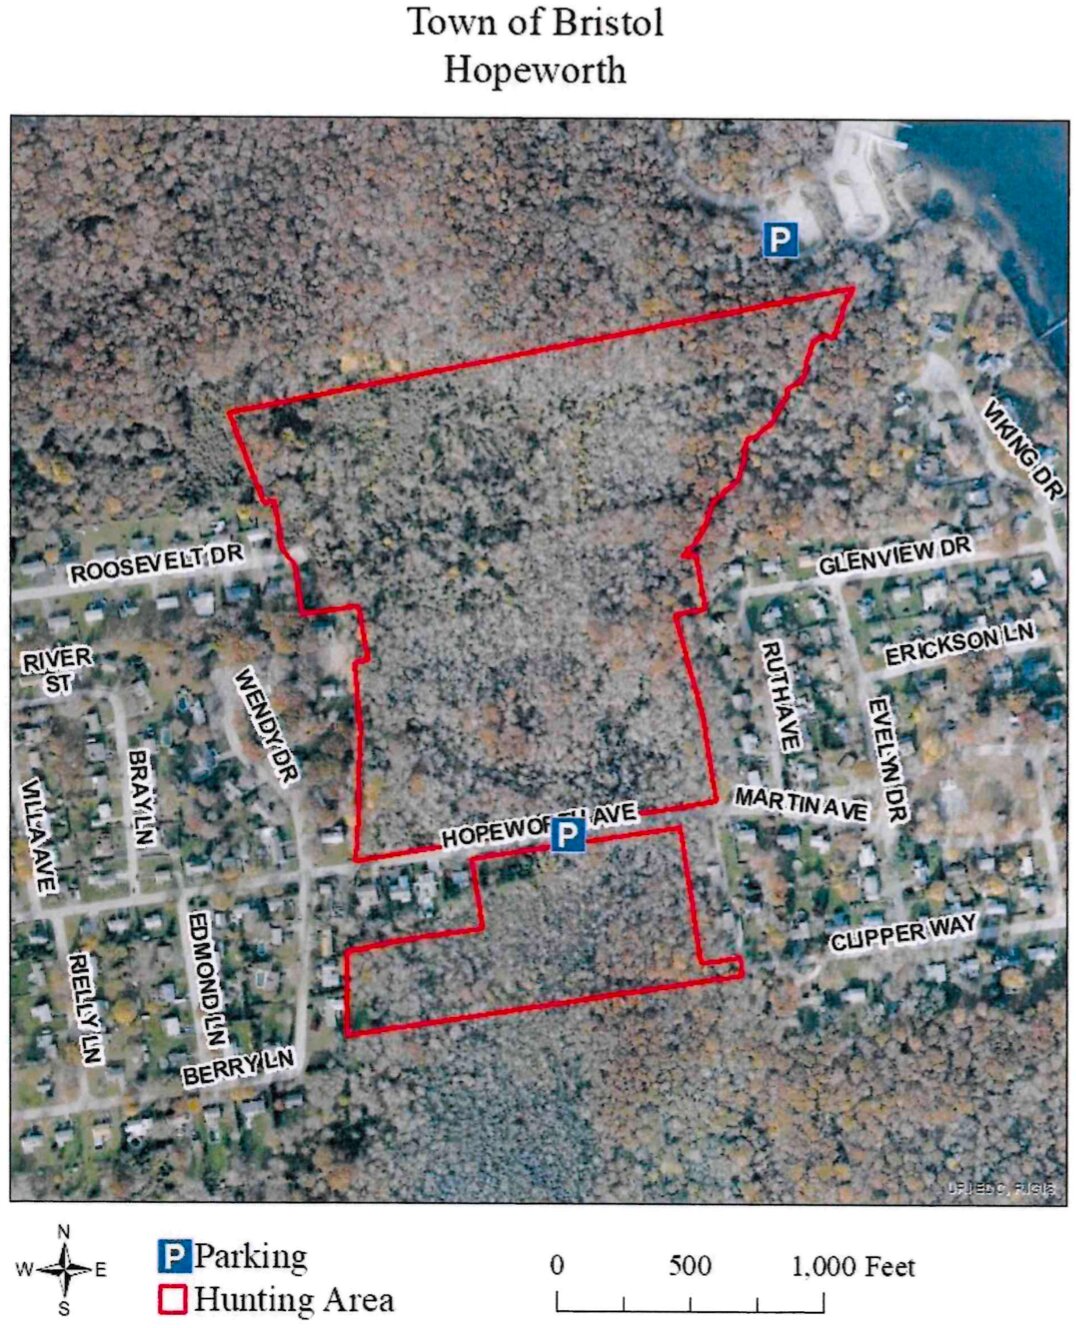 Parking and access to the hunting area of Hopeworth will be available from the Annawamscutt Boat Ramp or Hopeworth Avenue.